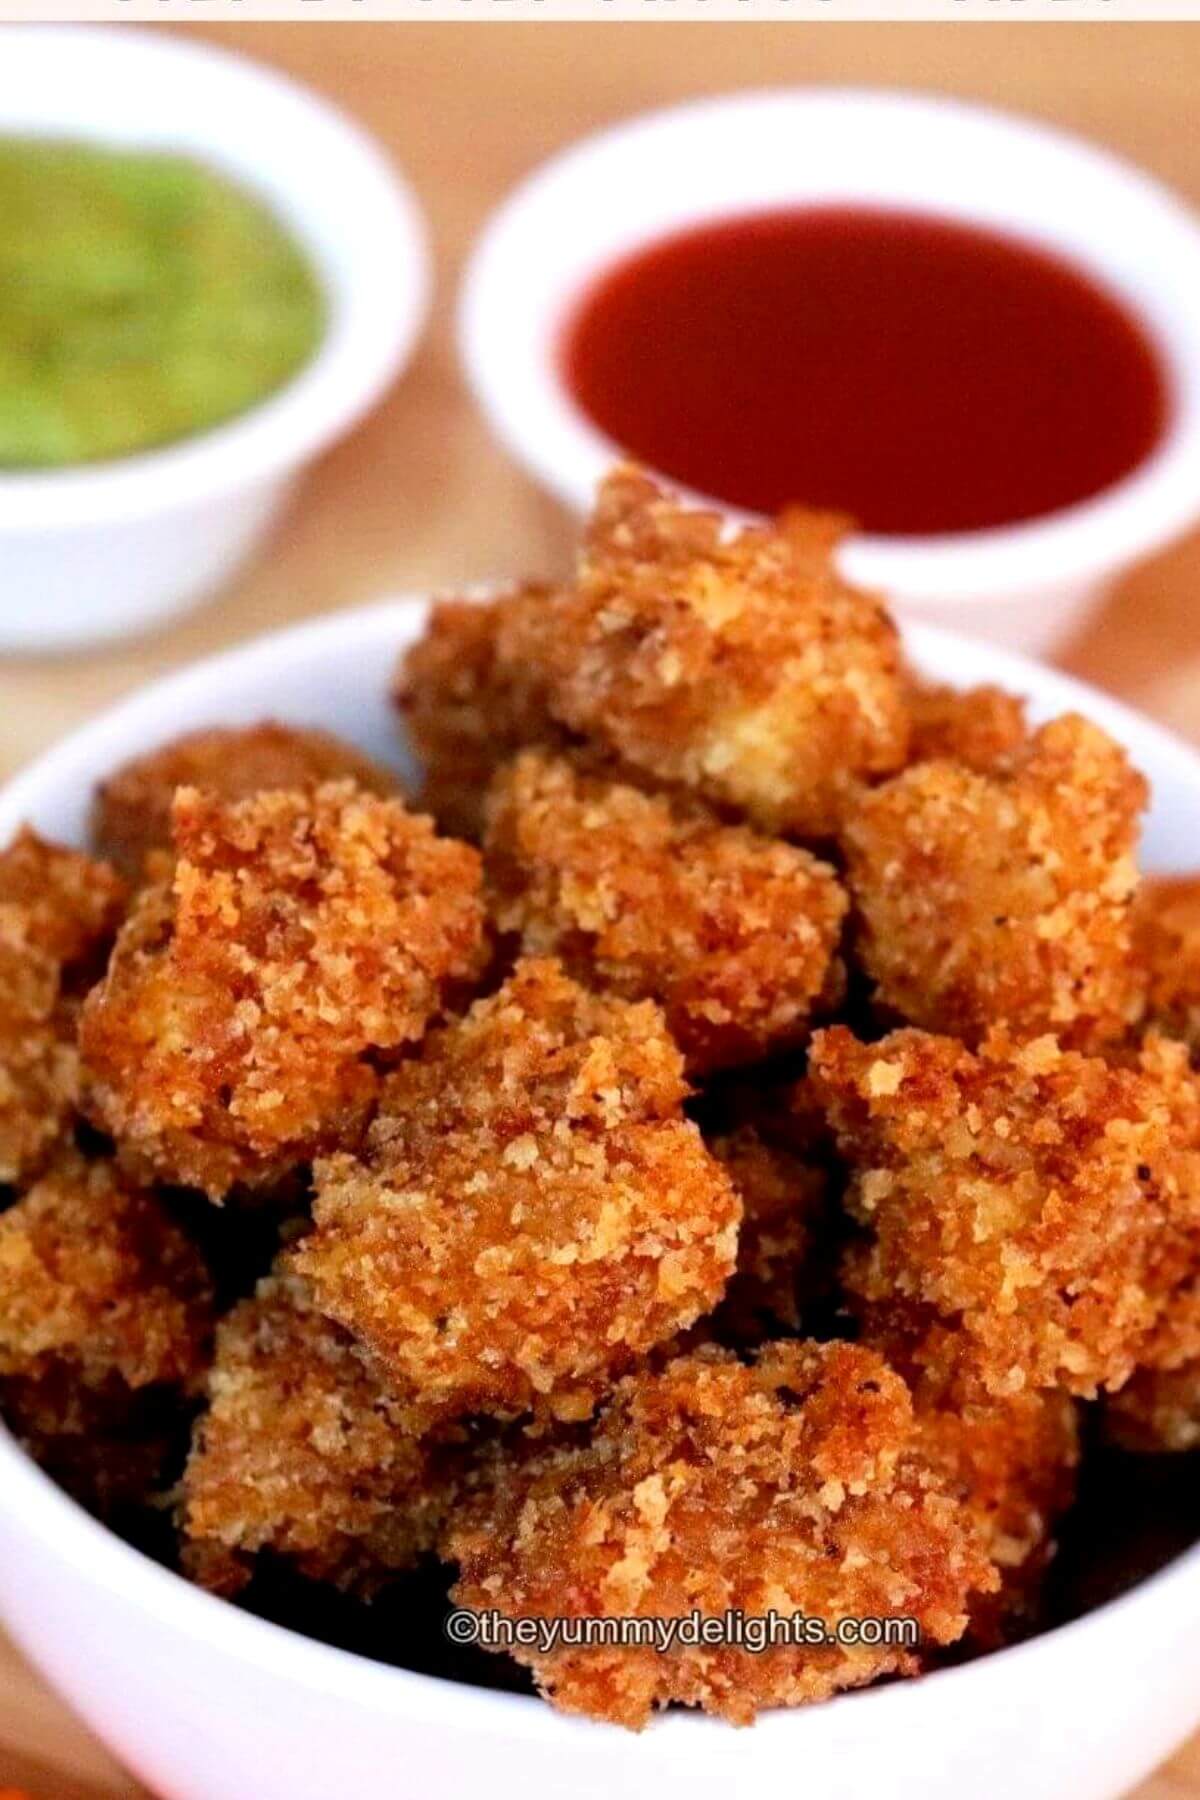 close-up of bowl full of popcorn chicken. It is served with tomato ketchup and green chutney on the side.